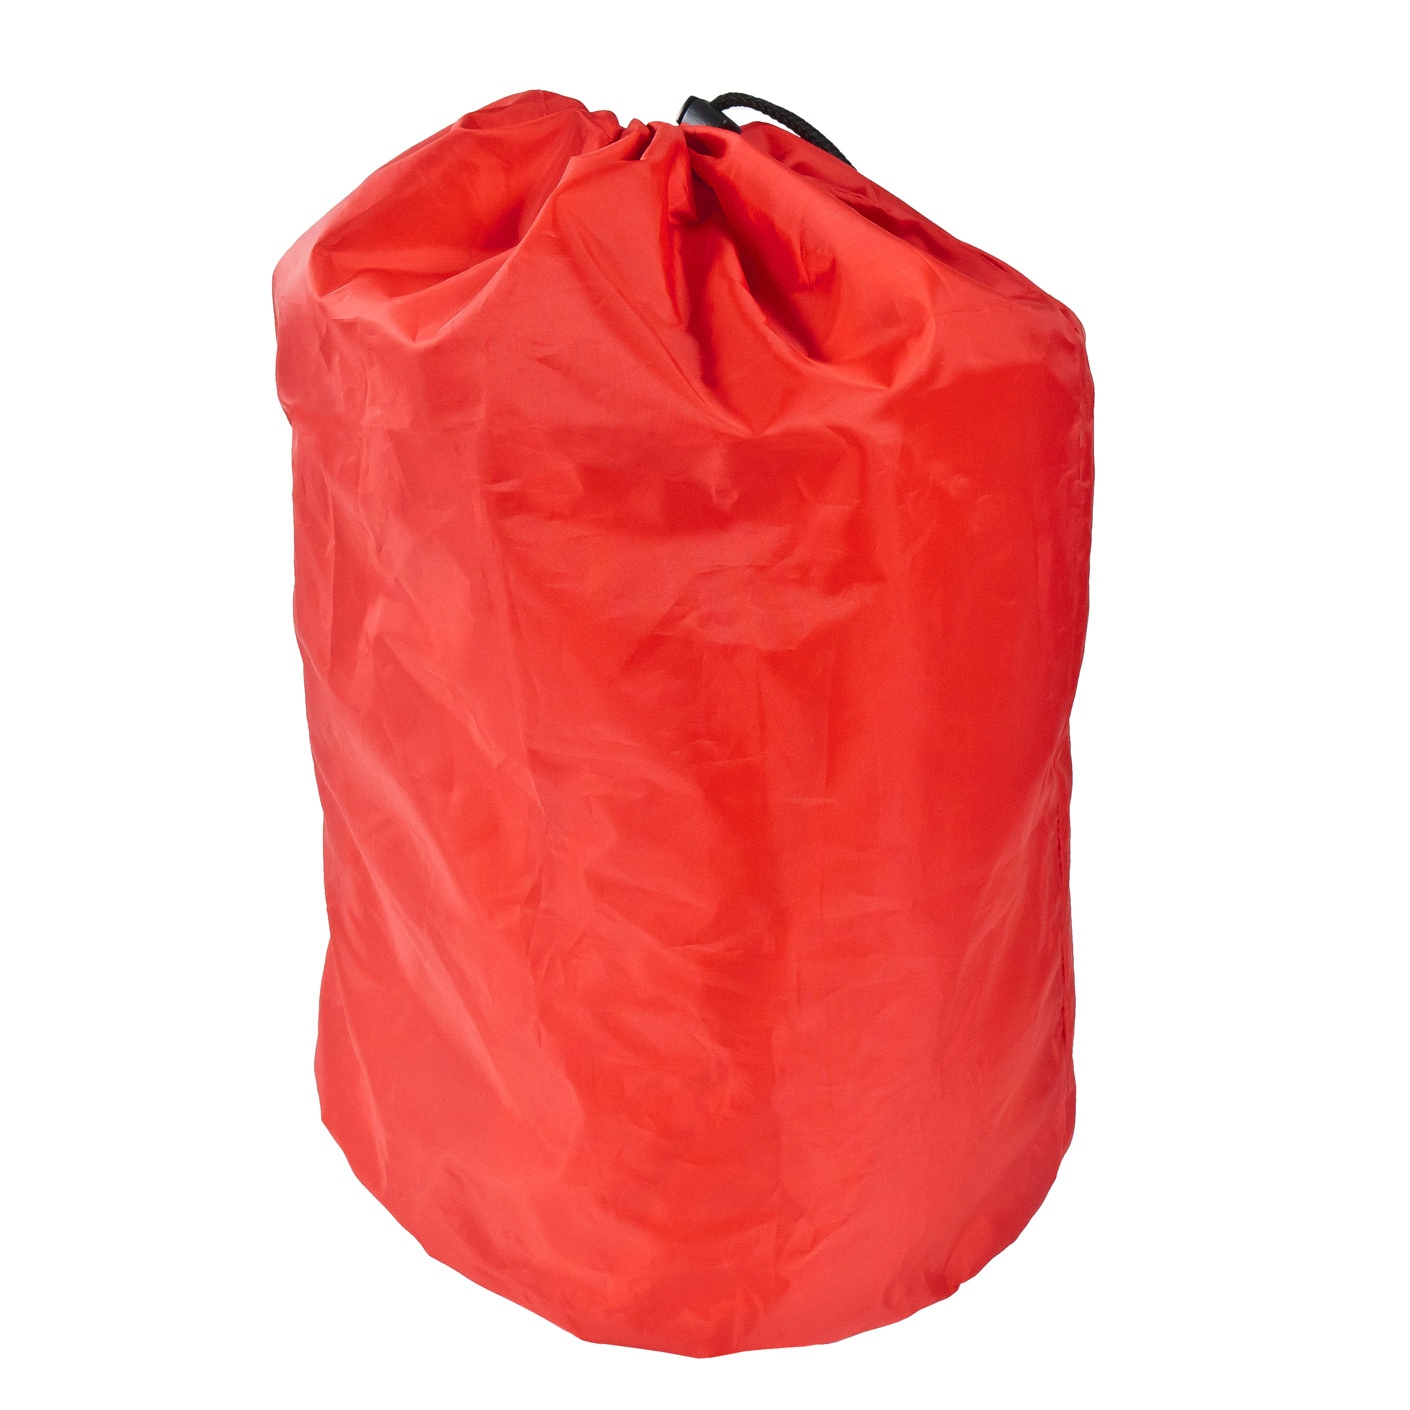 10.2-Gallon (s) Storage Bags in the Plastic Storage Bags